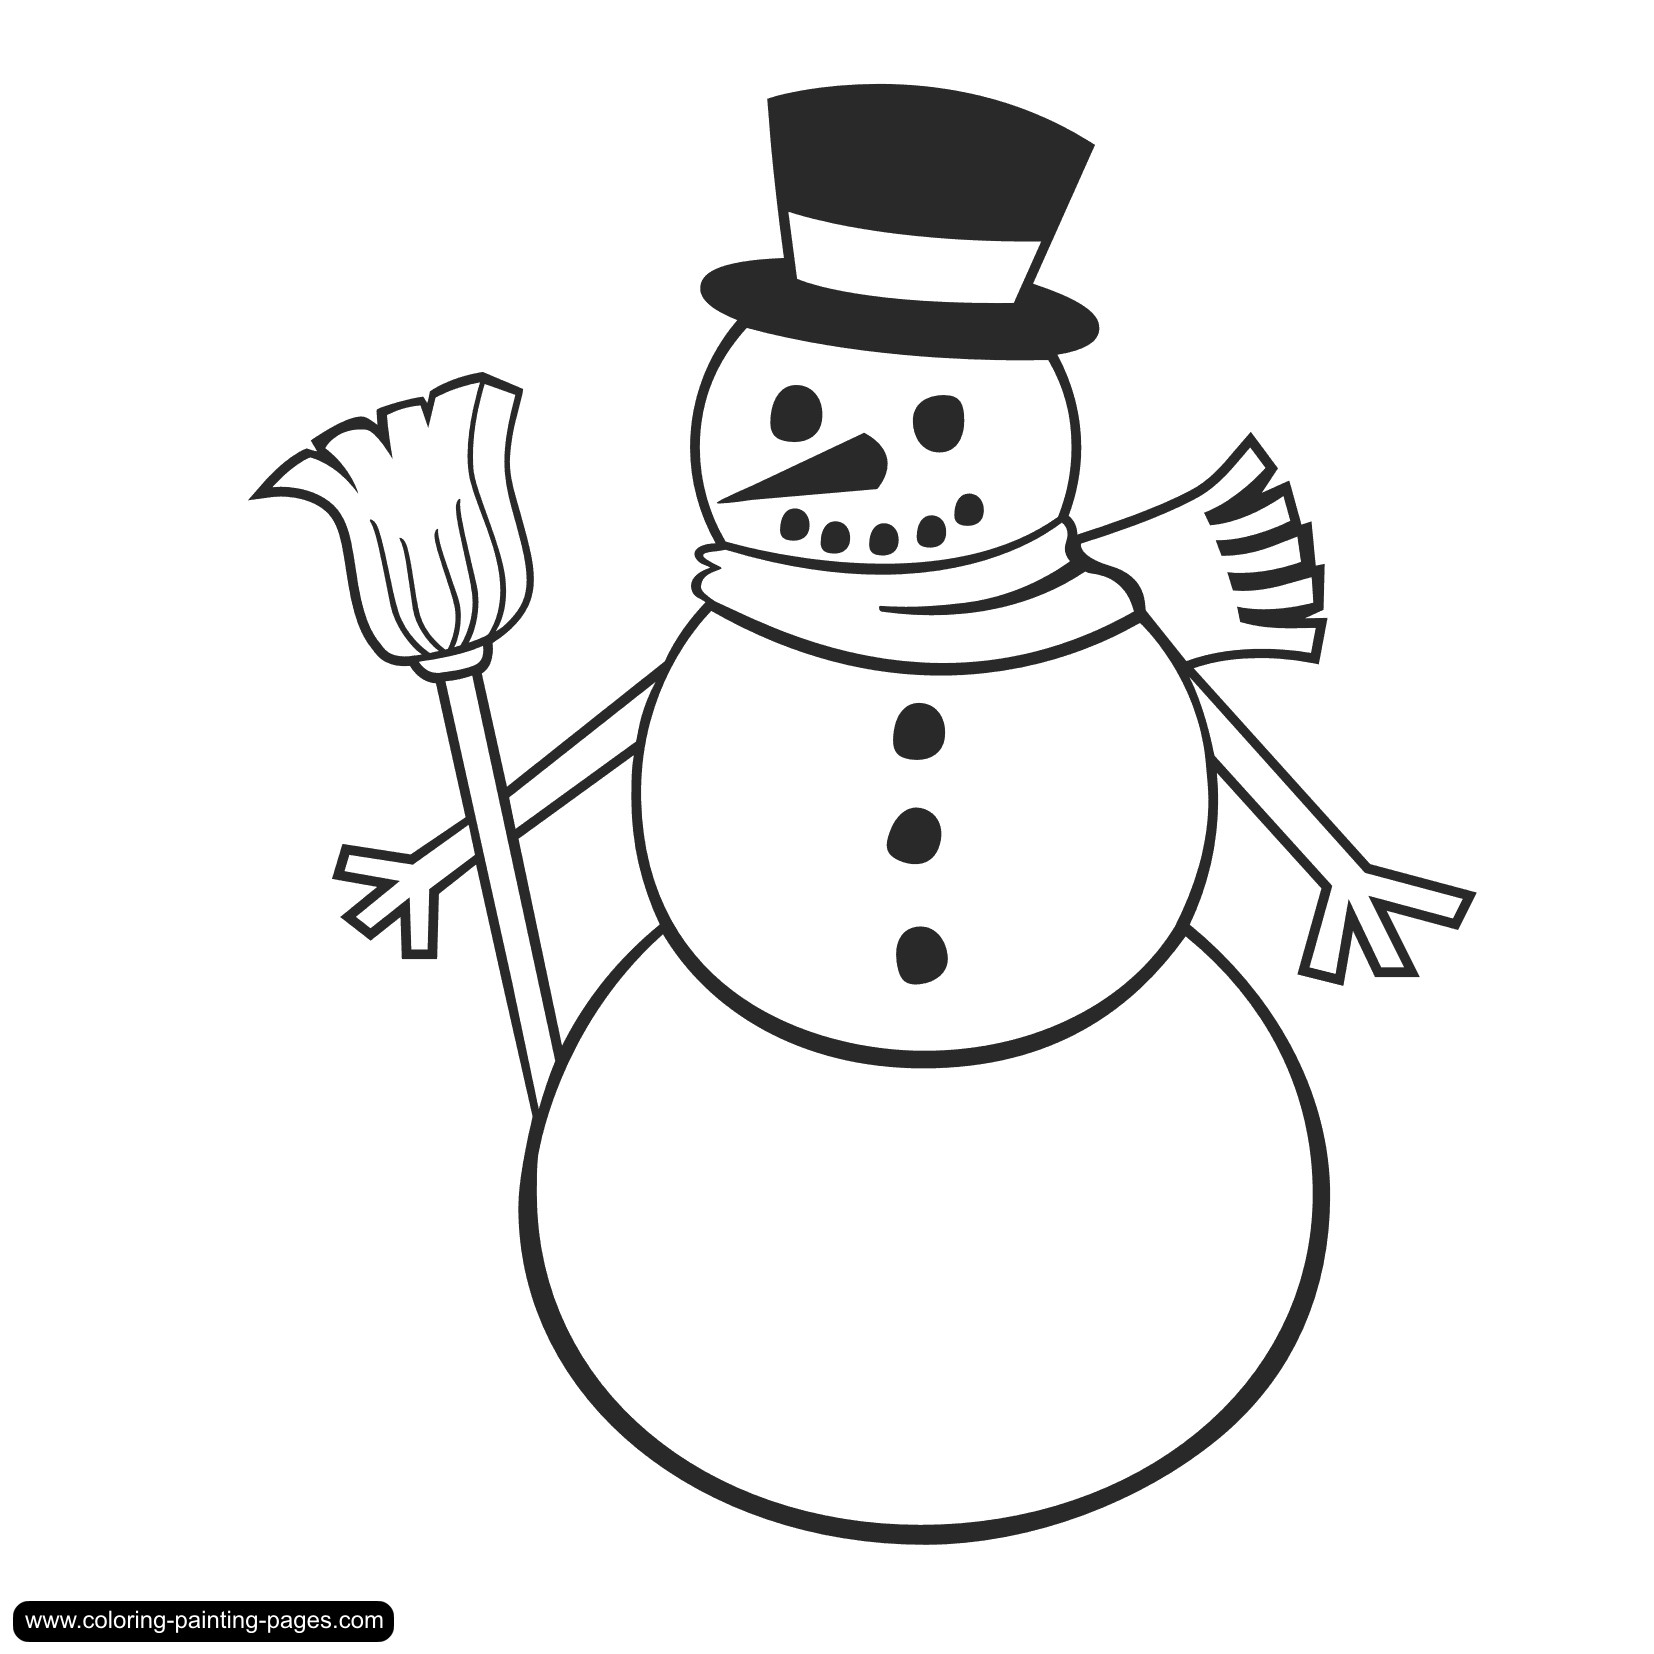 Coloring Pages Of Snowmen Merry Christmassnowman Coloring Pages For Kids With Blank Snowman